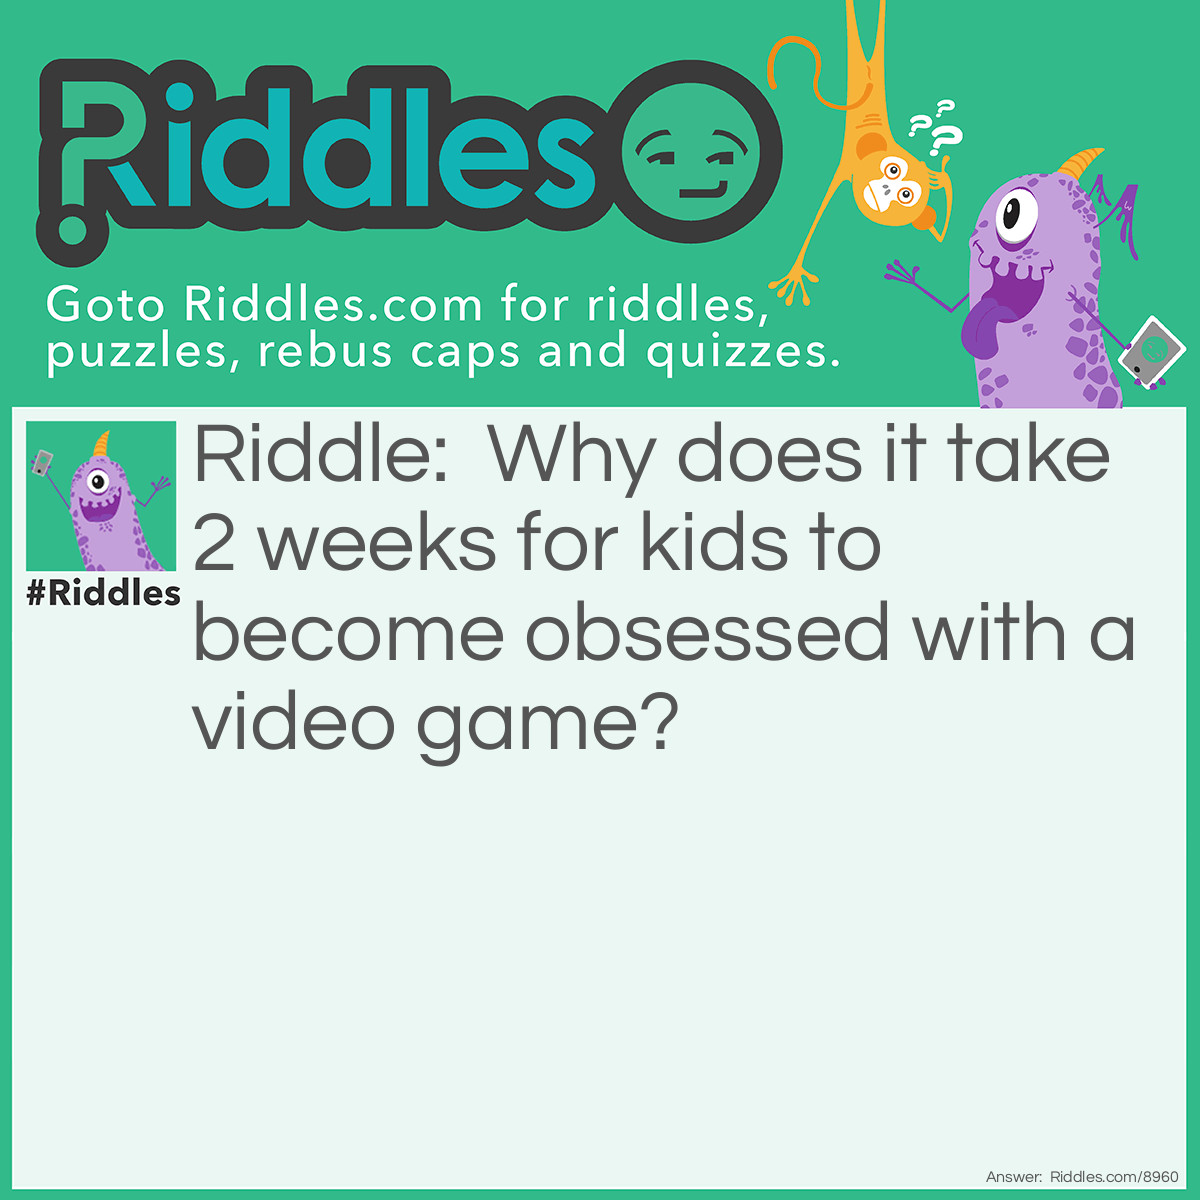 Riddle: Why does it take 2 weeks for kids to become obsessed with a video game? Answer: Because it's Fortnite (a fortnight)